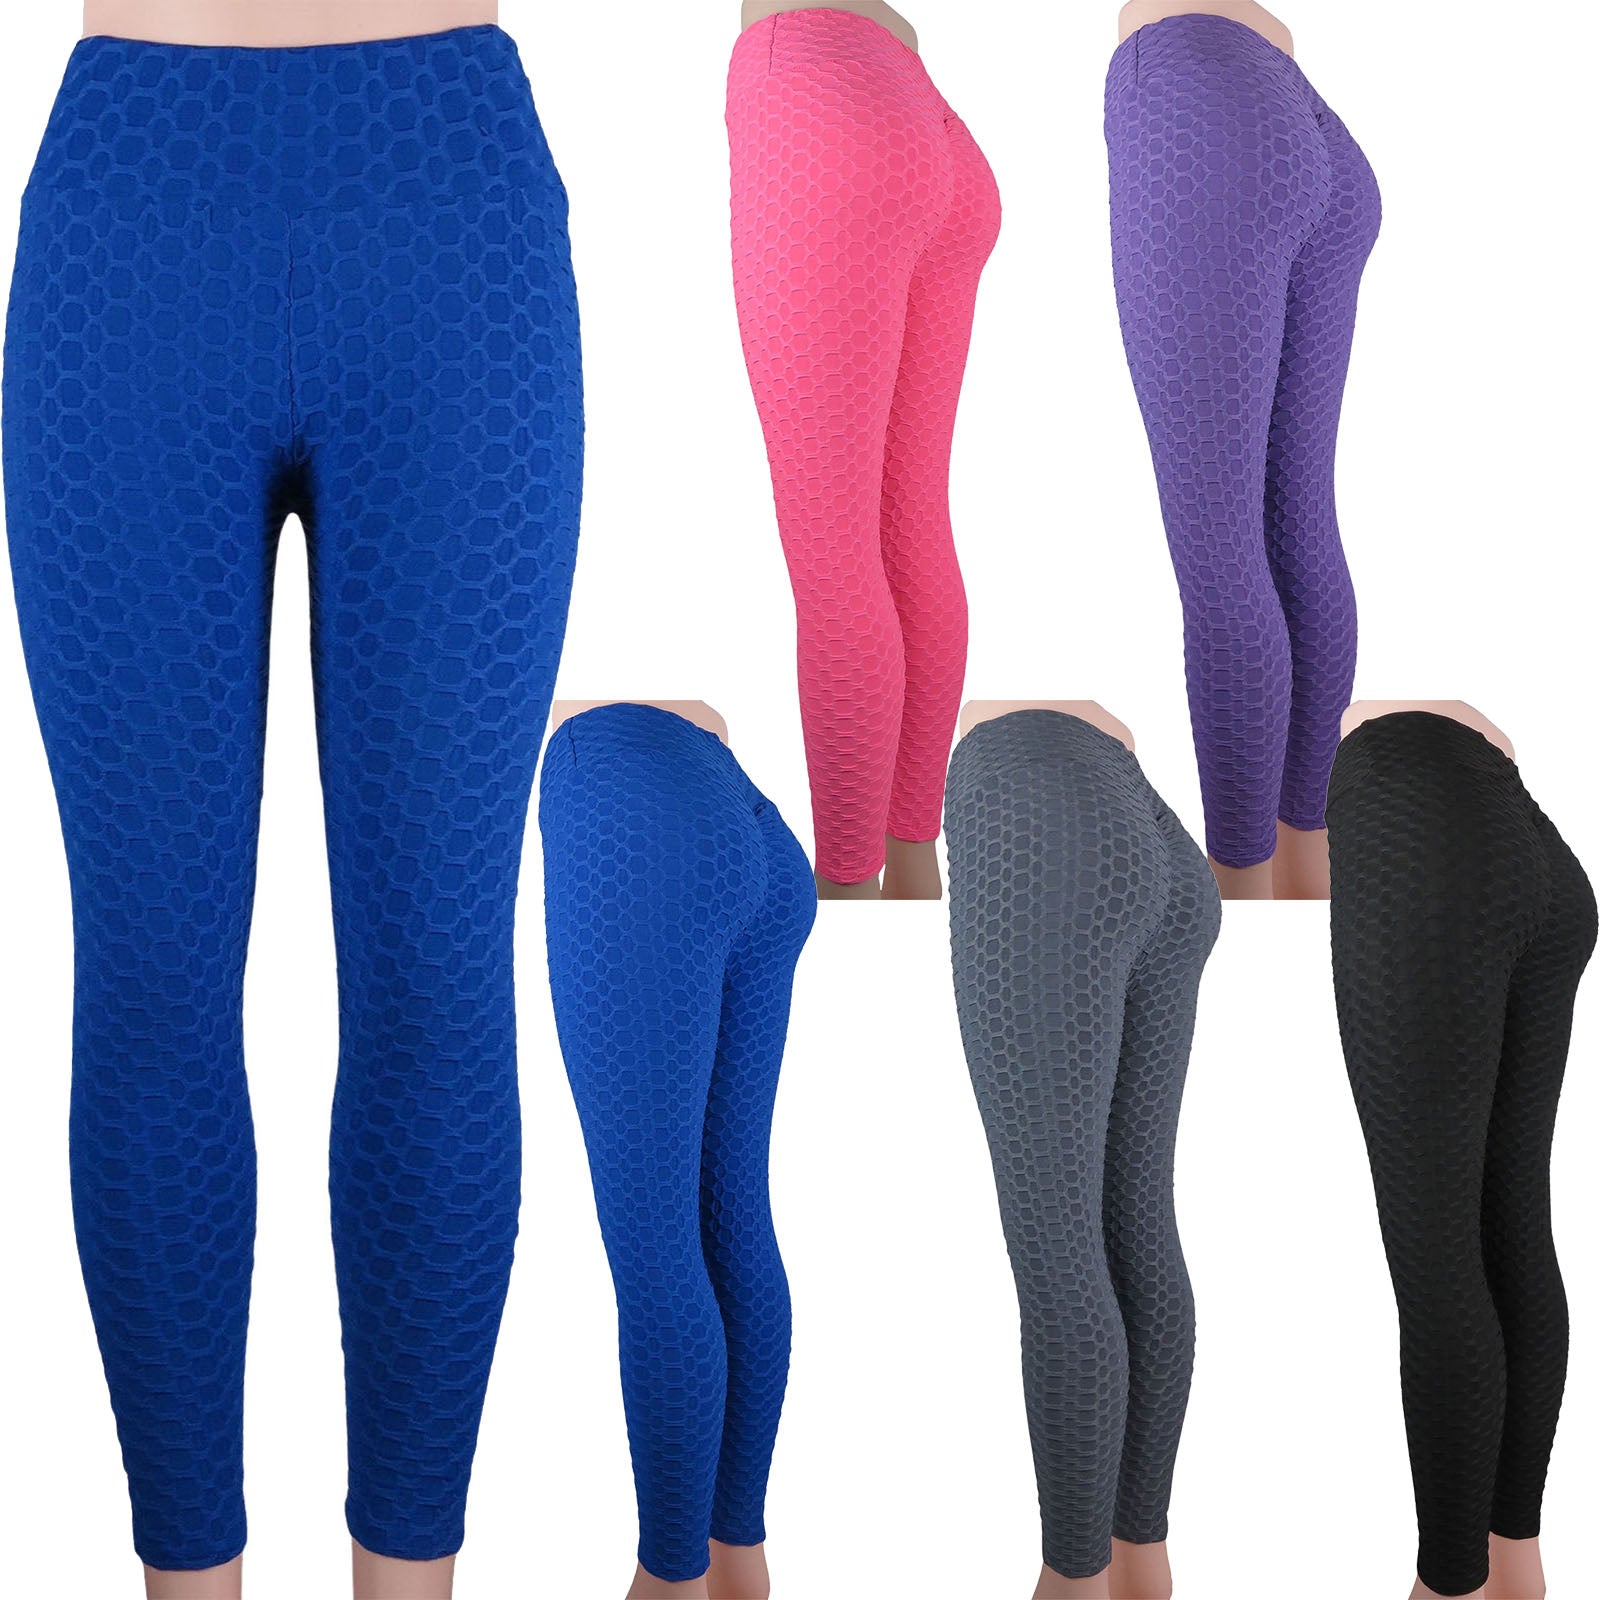 Wholesale bubble pattern tiktok leggings with a high waist and anti cellulite scrunch butt compression in assorted colors